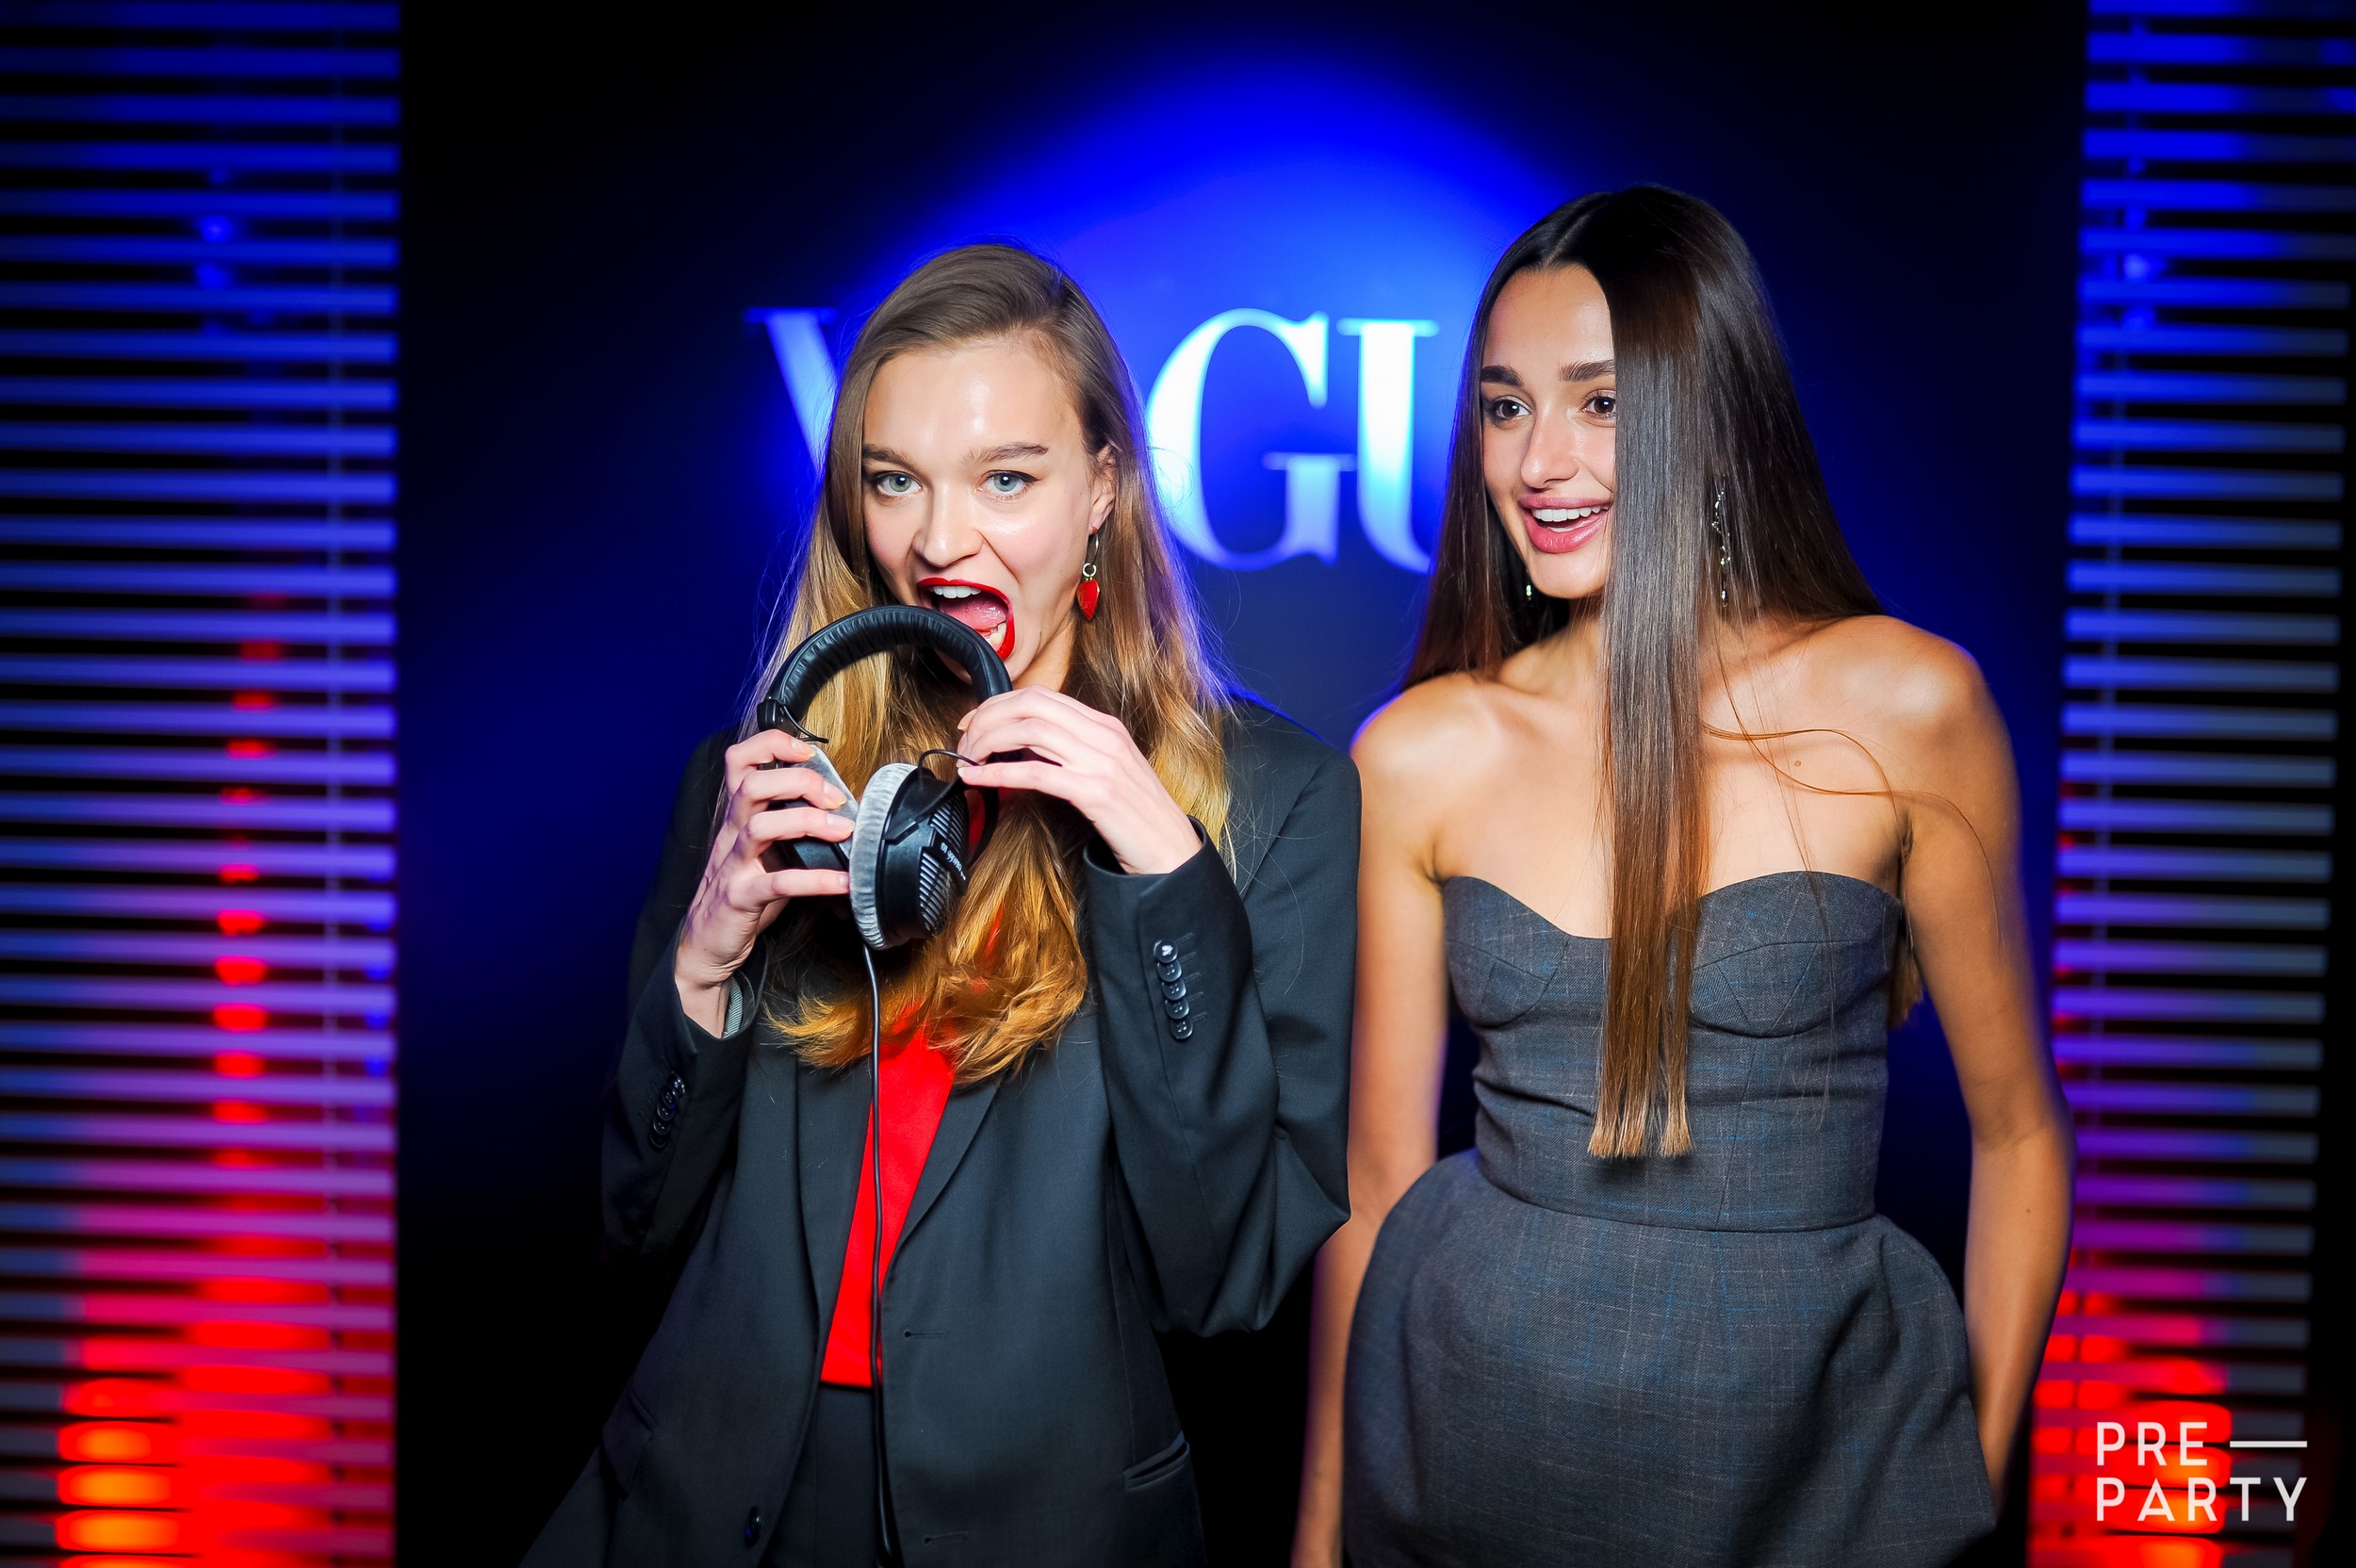 Vogue Fashion’s Night Out 2017